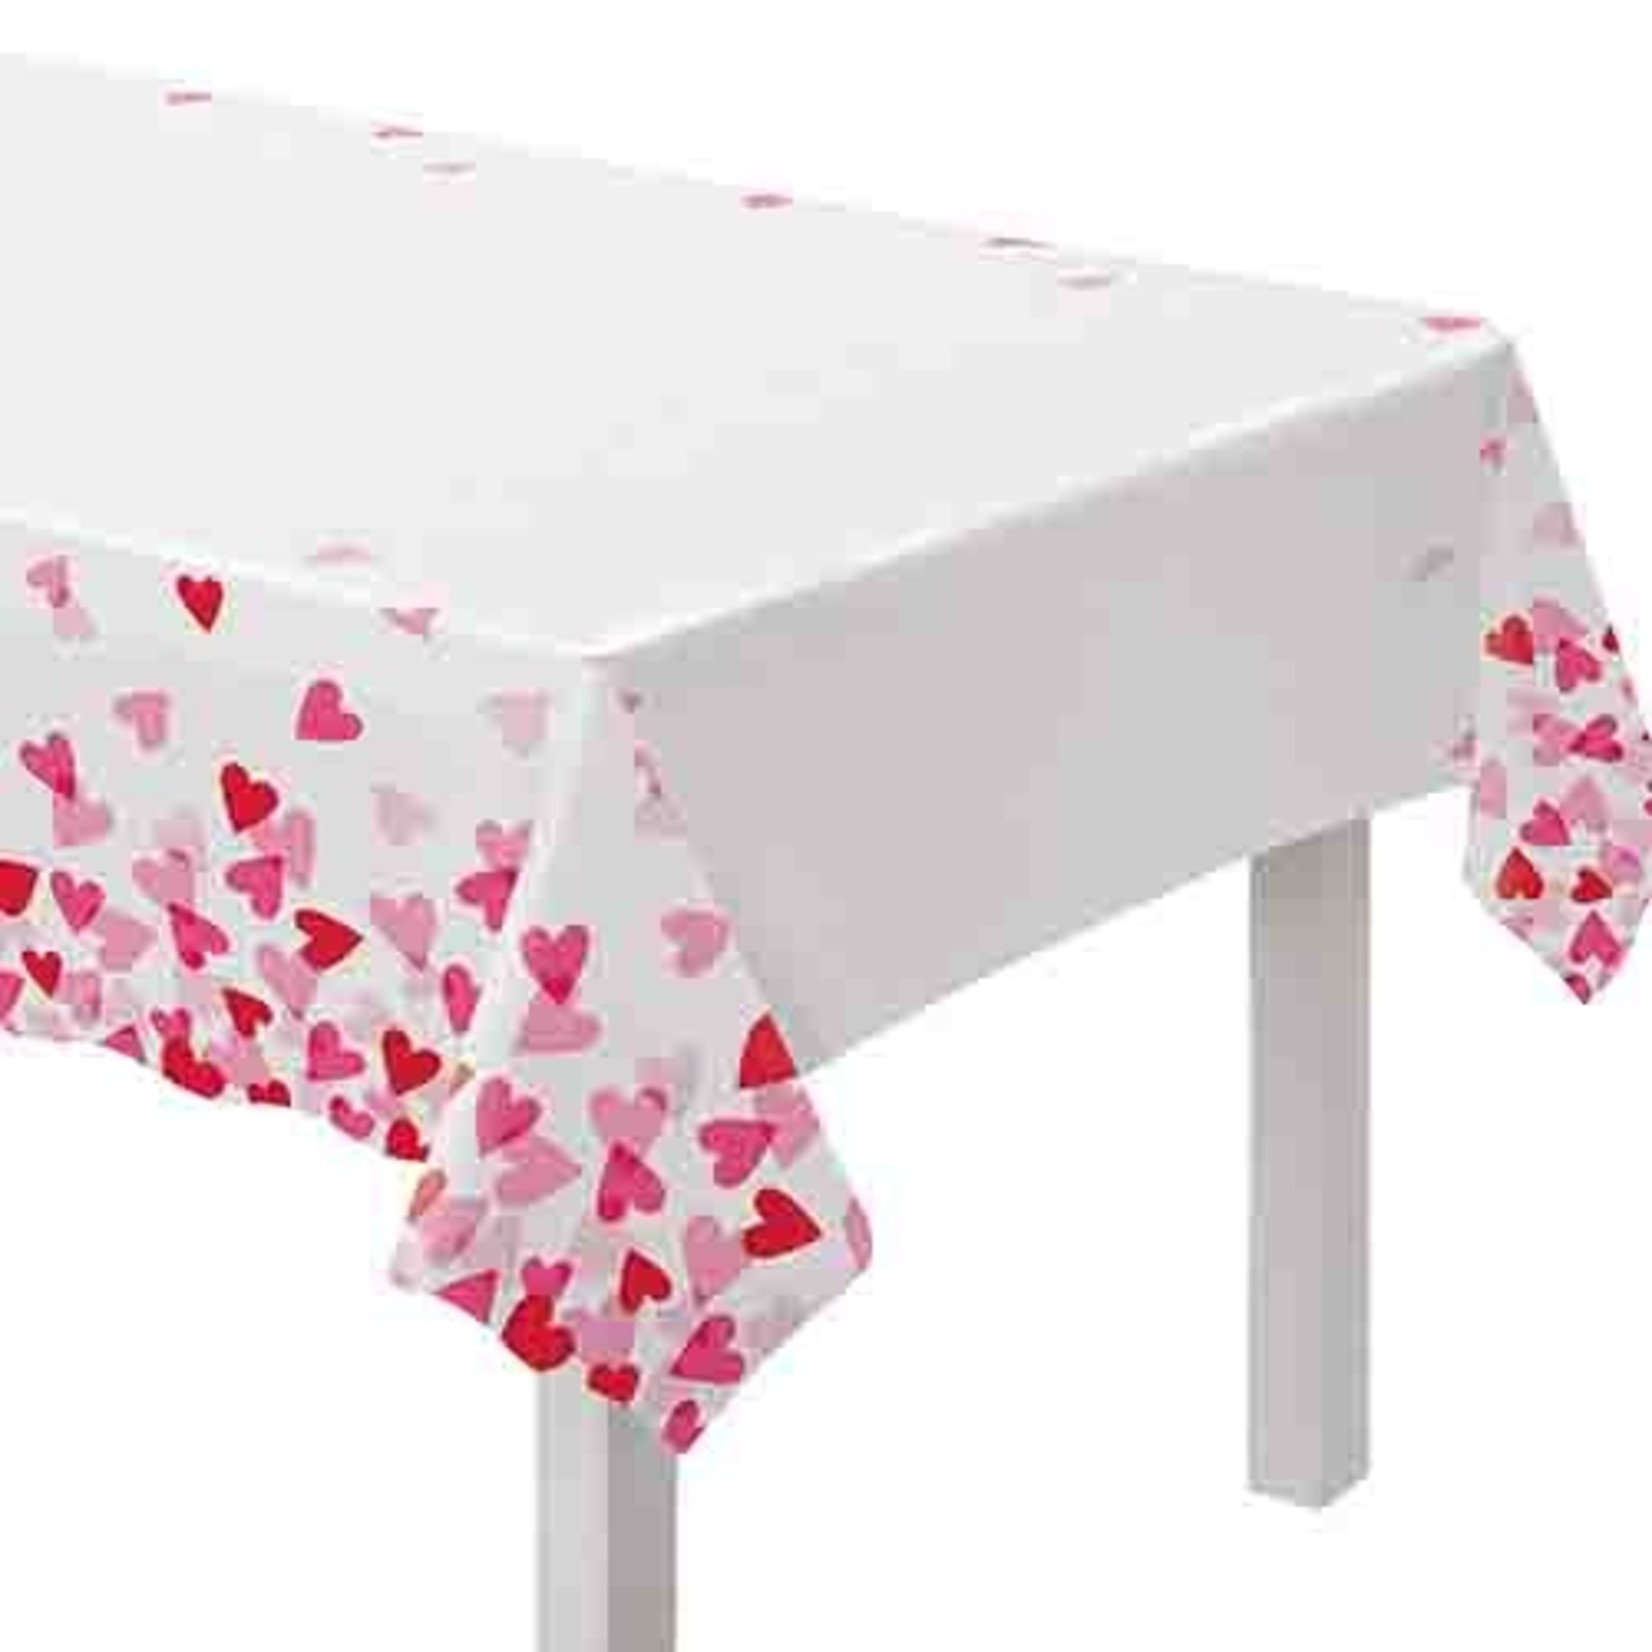 Amscan Heart Party Plastic Table Cover - 54" x 102"